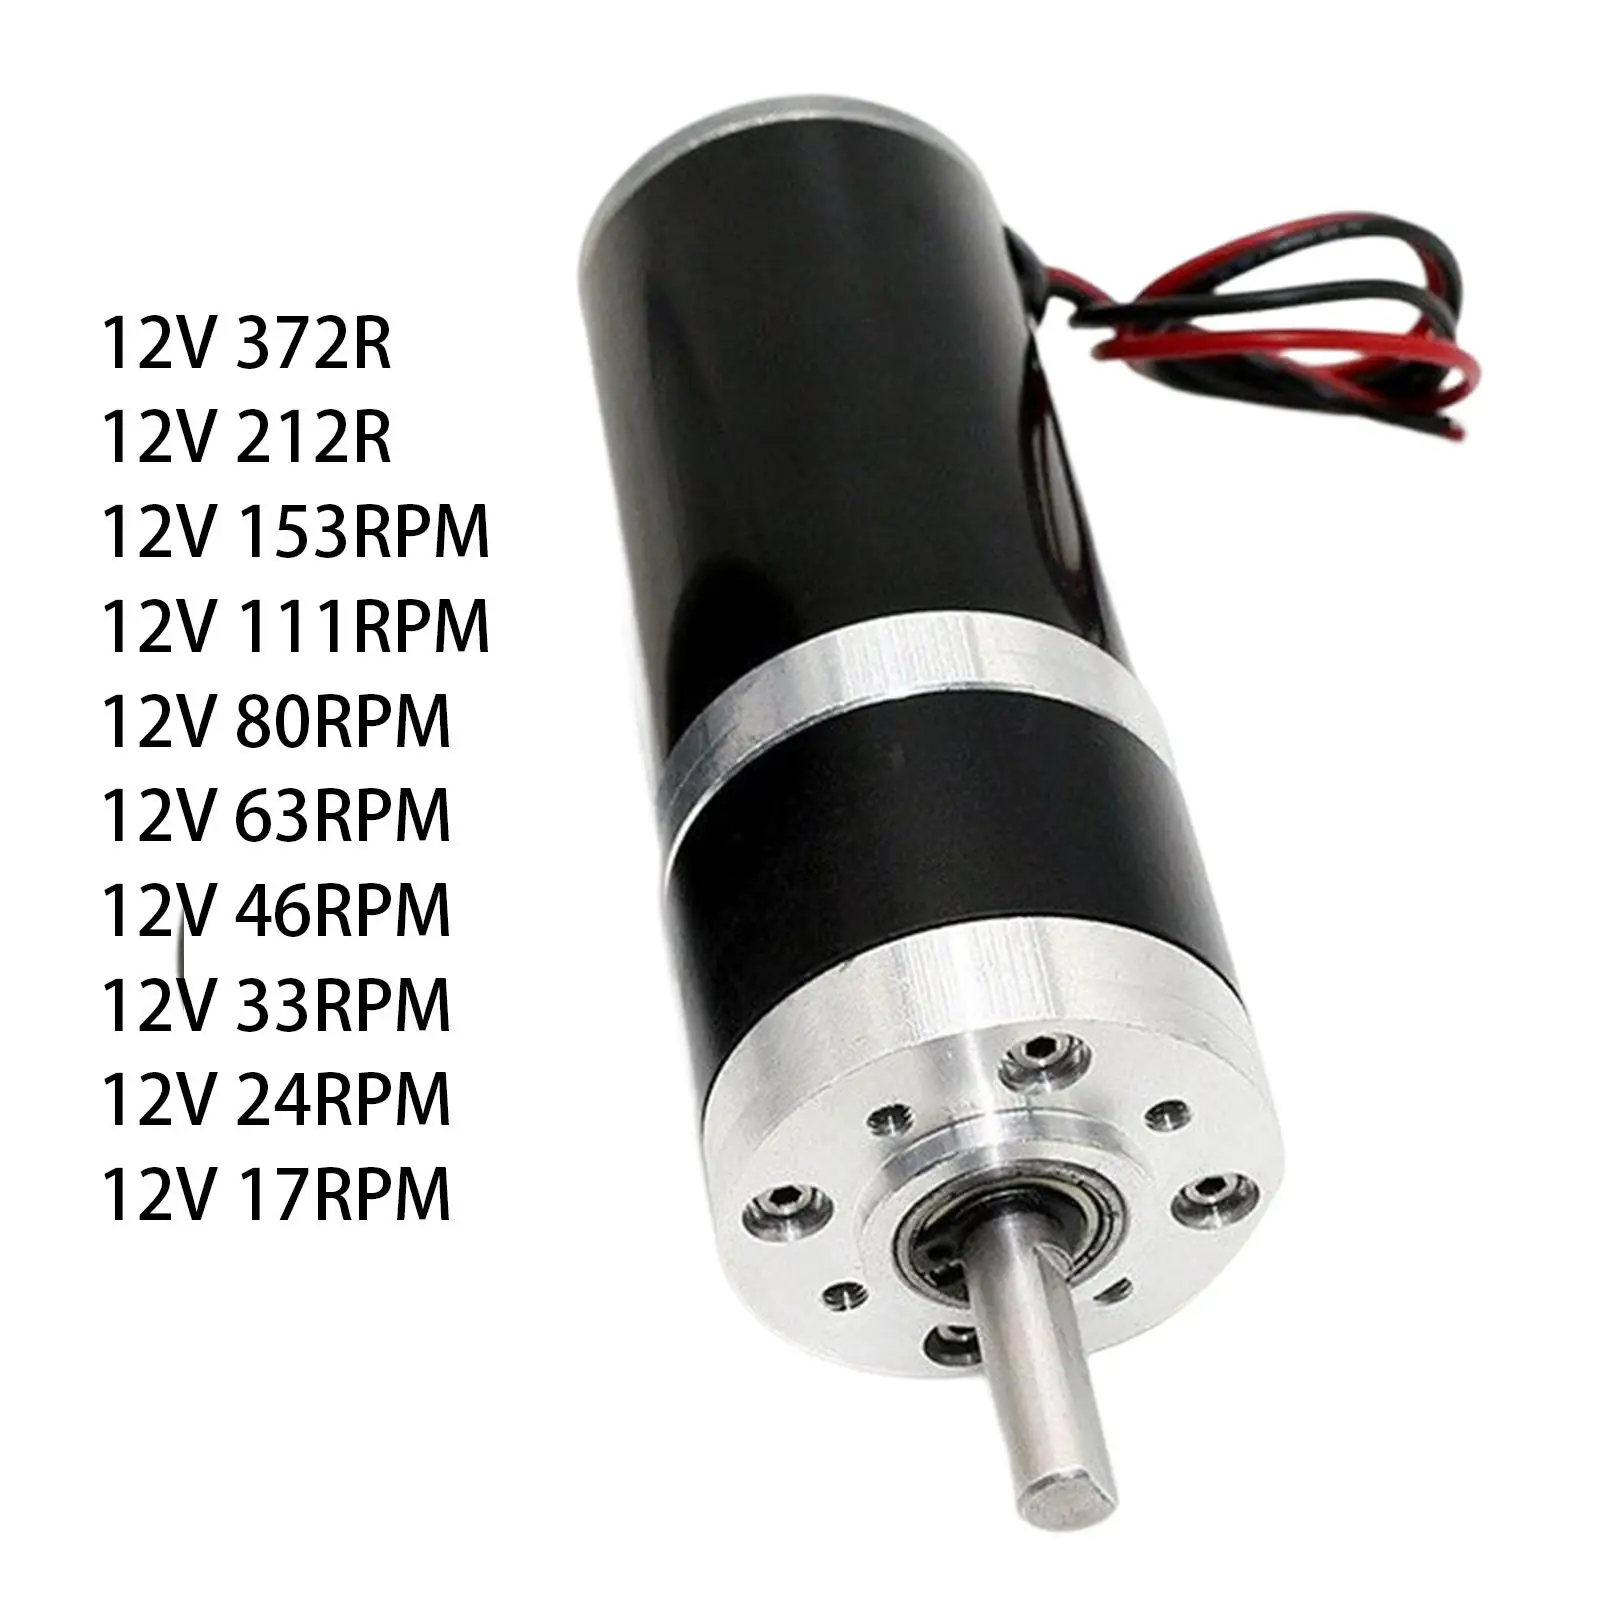 Geared Motor Micro Reversible Sturdy Motor Speed Reduction Geared Motor for Robot High Precision Measuring Instrument Car Parts